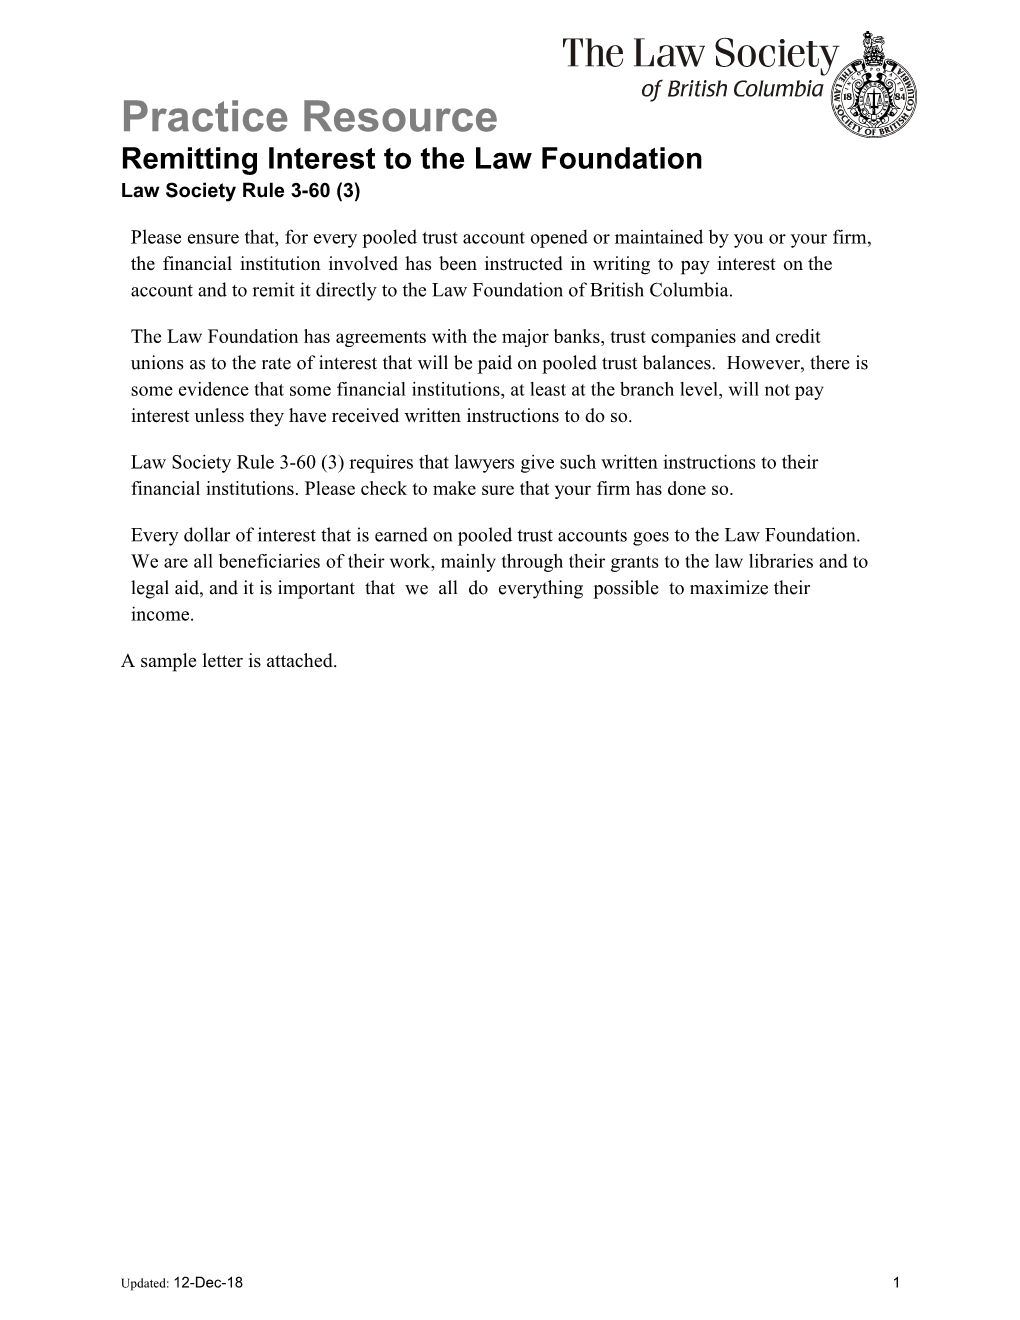 Practice Resource: Remitting Interest to the Law Foundation